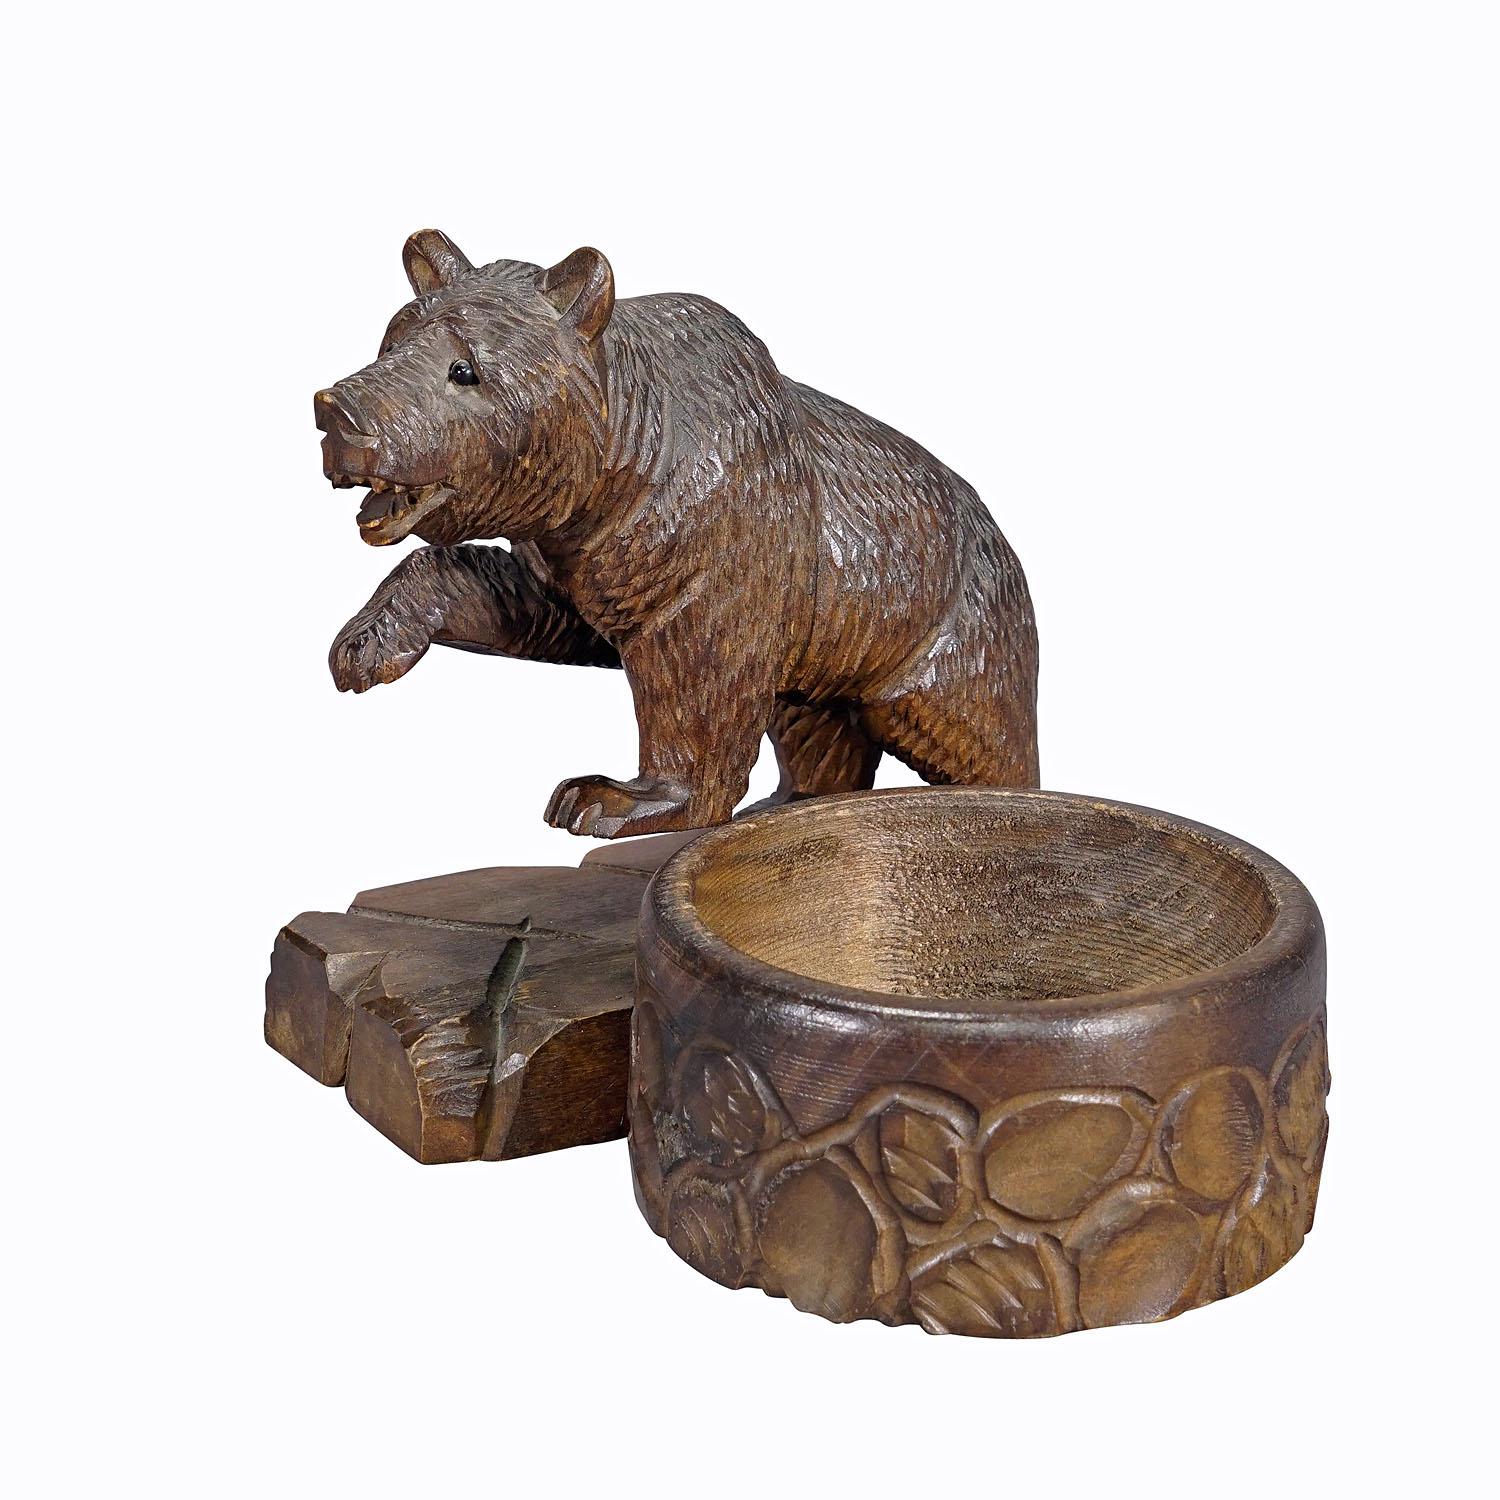 A Wooden Carved Black Forest Bear with Bowl ca. 1920s
Item e7283
A nicely carved Black Forest bear desk set with bowl for small utensils. Executed in Brienz, Switzerland around 1920. Very good condition.

The tradition of wood carving, using manual